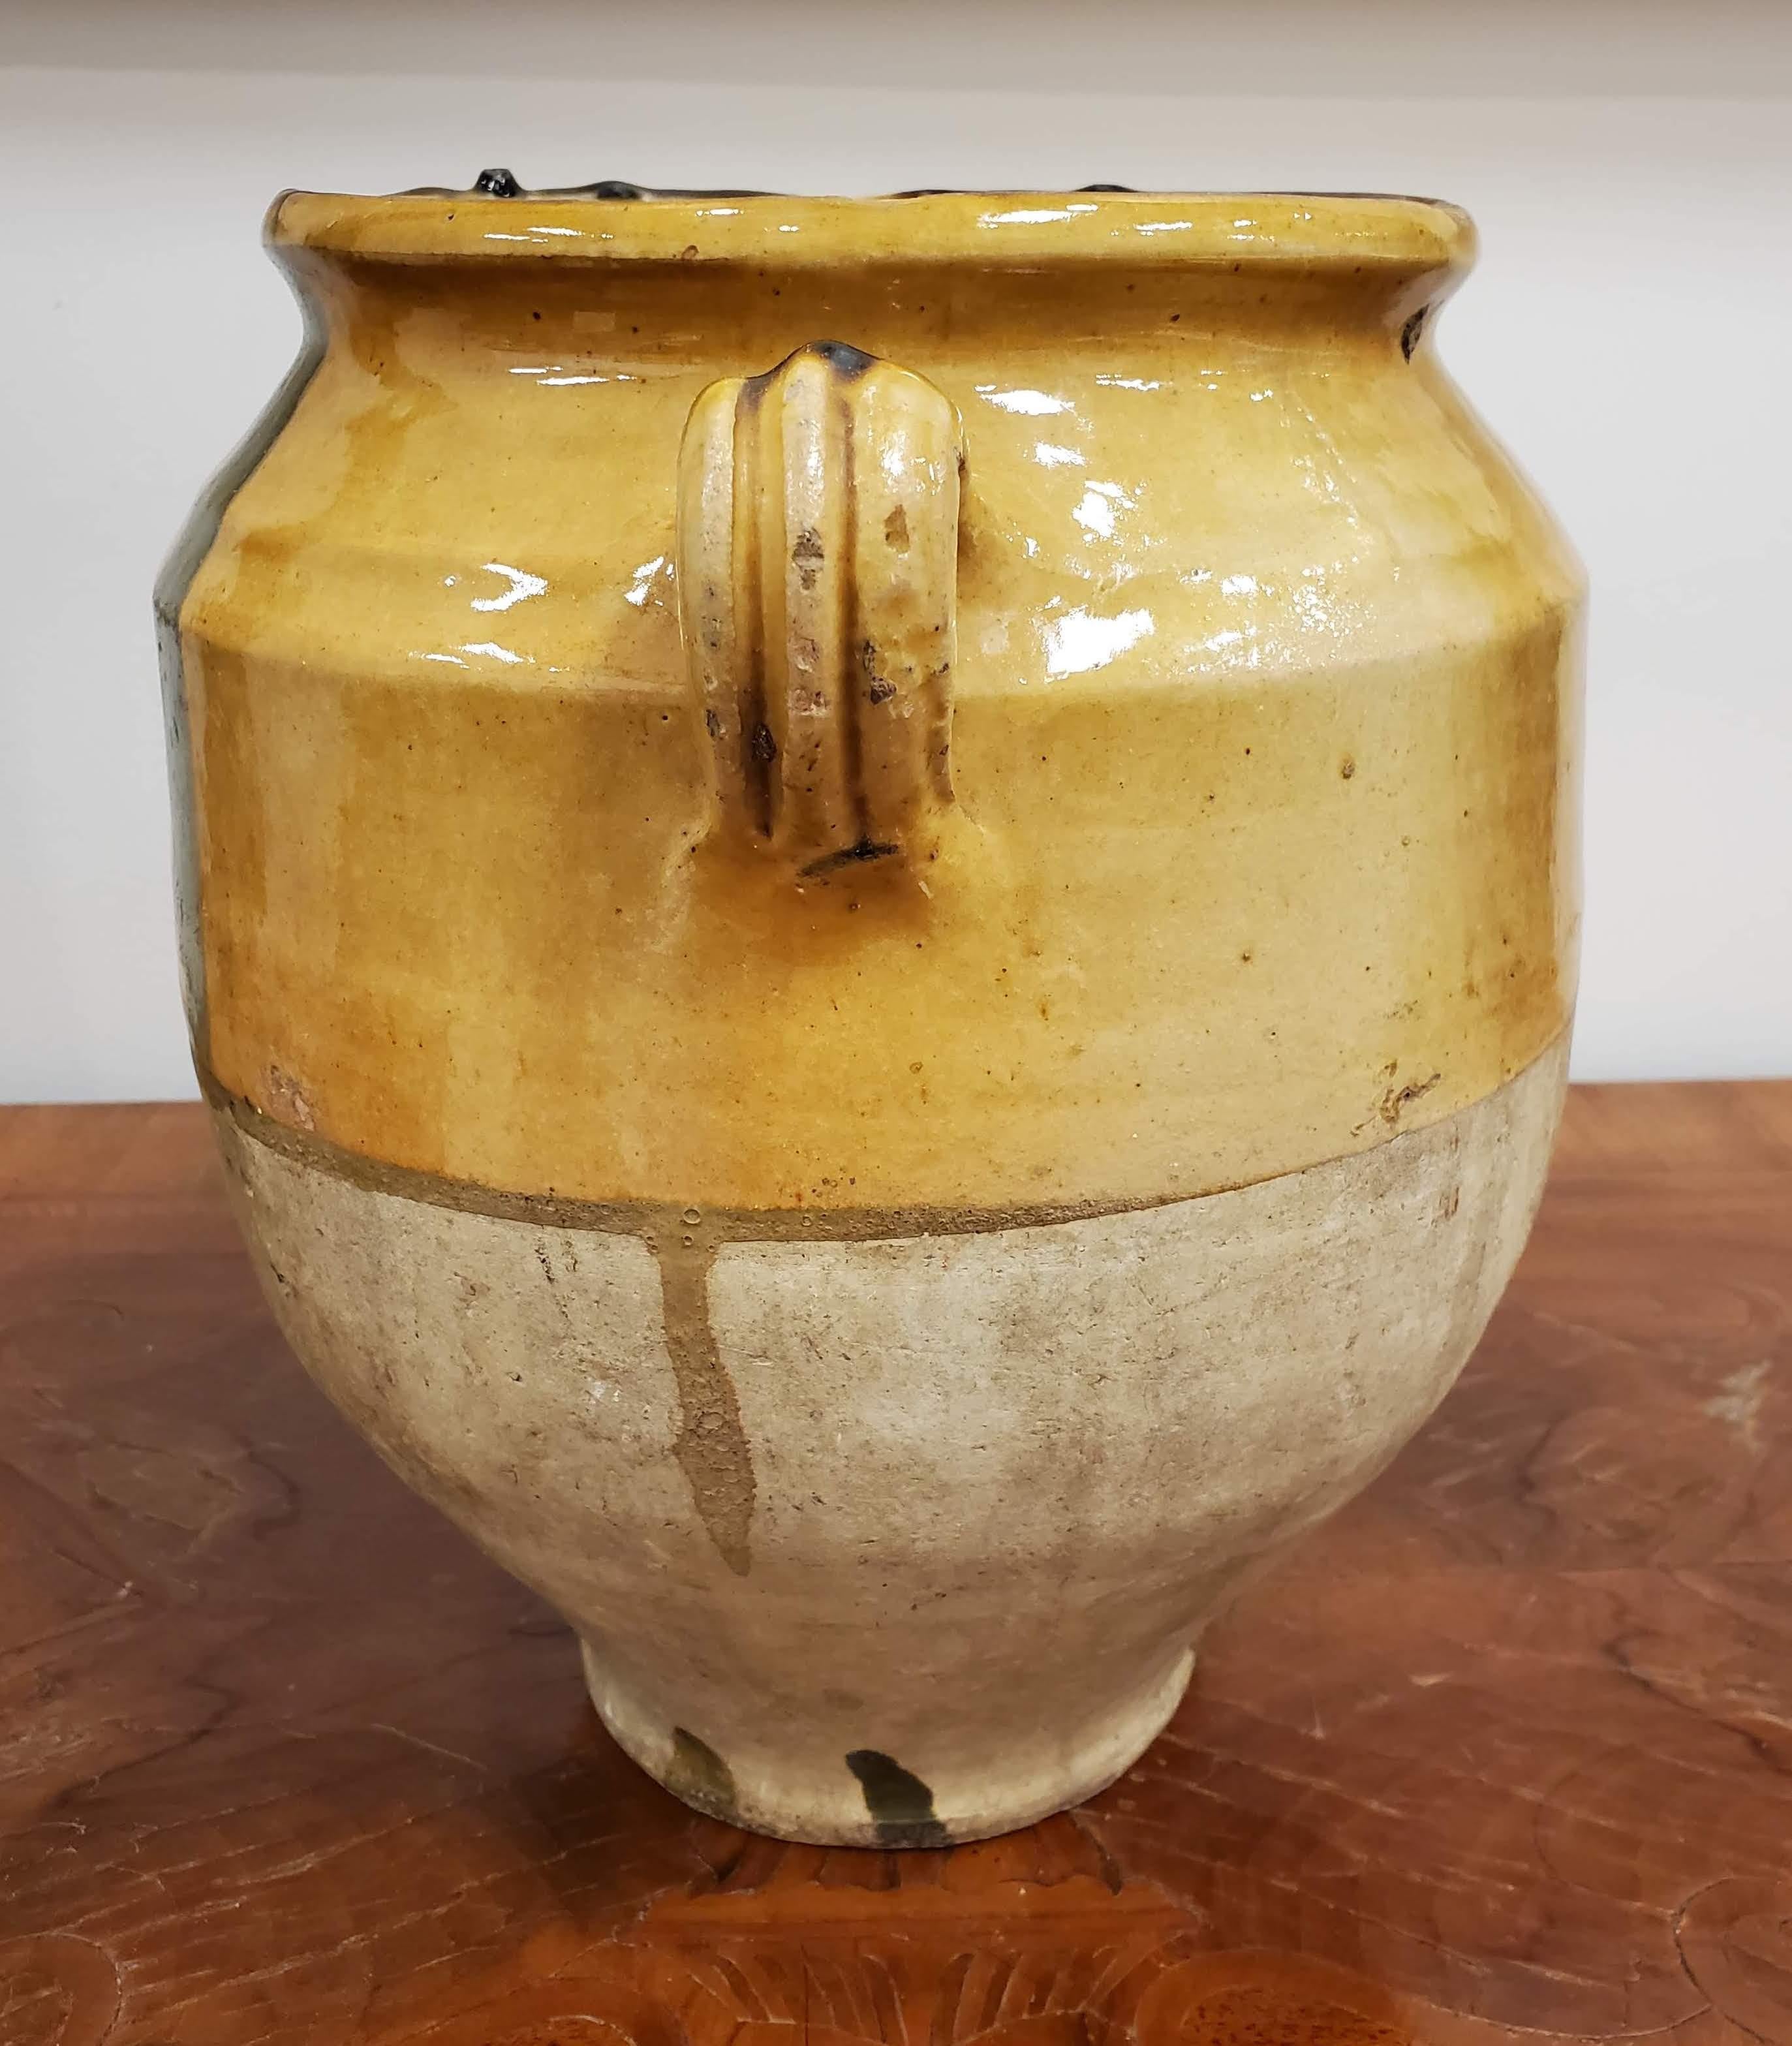 French Provincial terra cotta “Confit” Pot. Yellow glazed. Once a staple in French kitchens, confit pots were popular to preserve and cook duck before refrigeration existed. They are also the featured vase in Van Gogh's Sunflower series. 
Southern